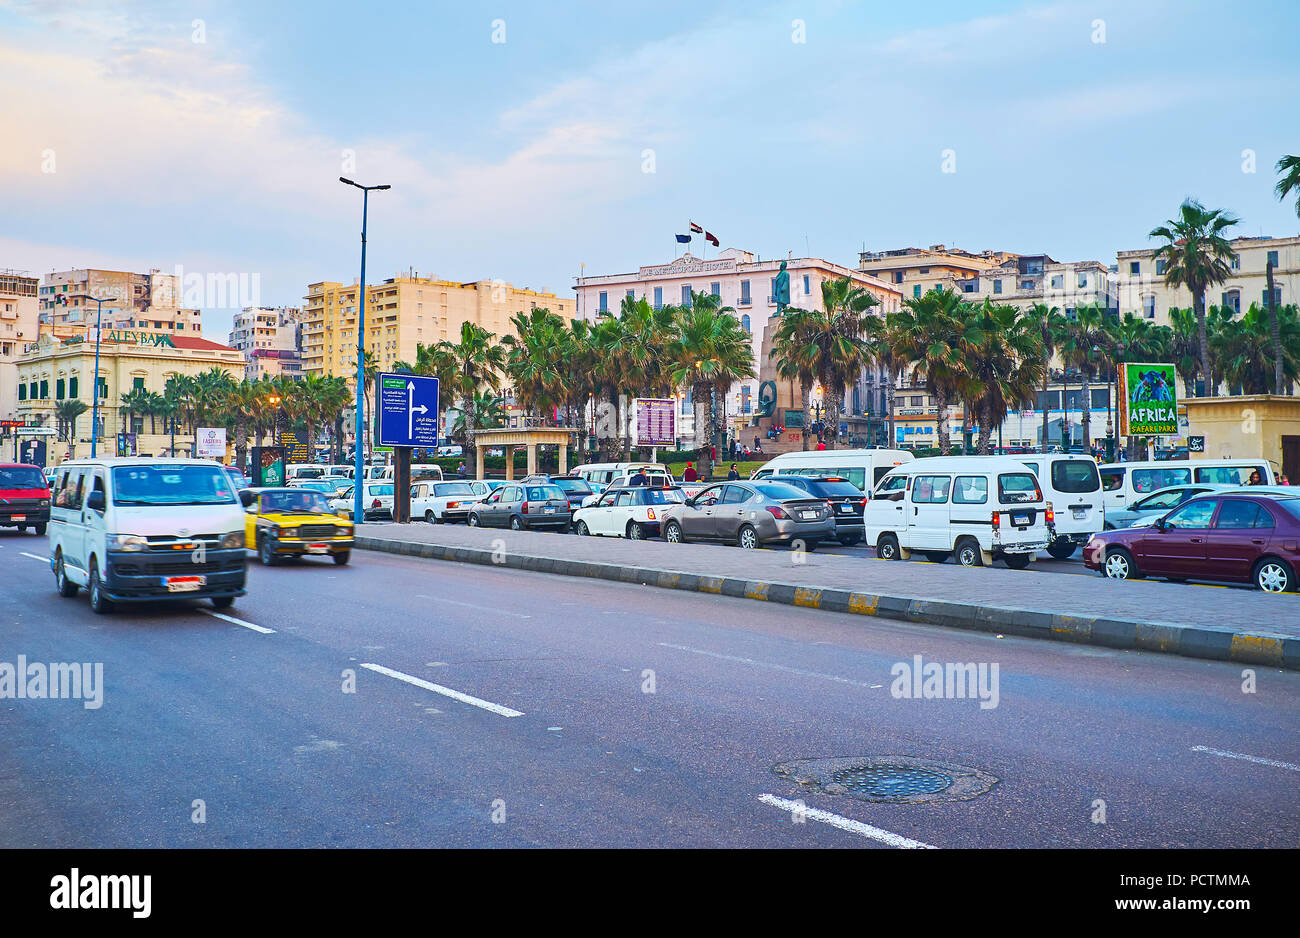 ALEXANDRIA, EGYPT - DECEMBER 18, 2017: The traffic along the Corniche avenue with a view on Saad Zaghloul square on background, on December 18 in Alex Stock Photo